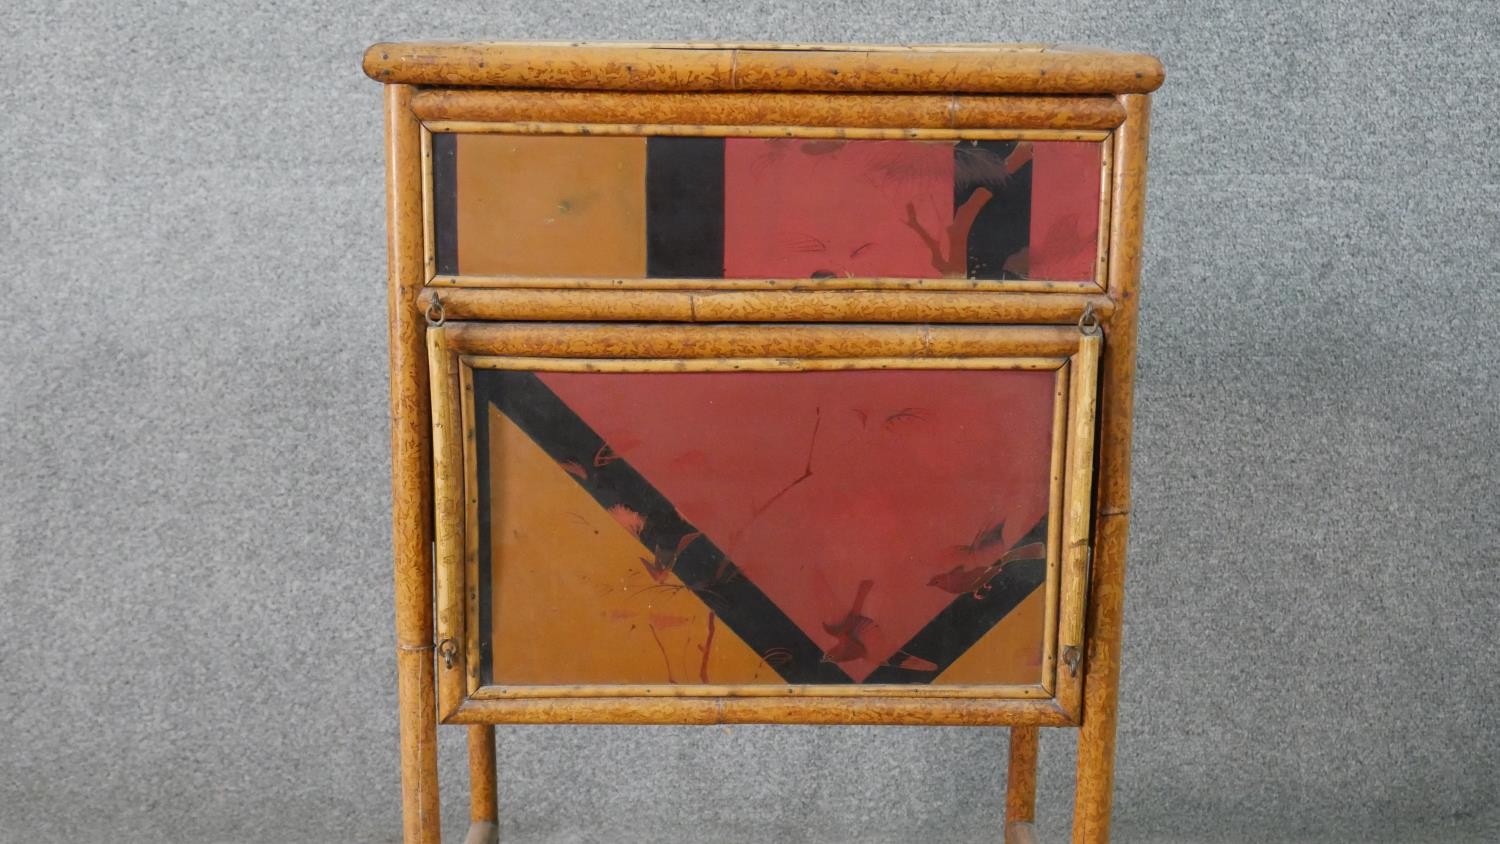 An Aesthetic Movement bamboo work table, with Japanese lacquered panels, the lid opening to reveal a - Image 9 of 11